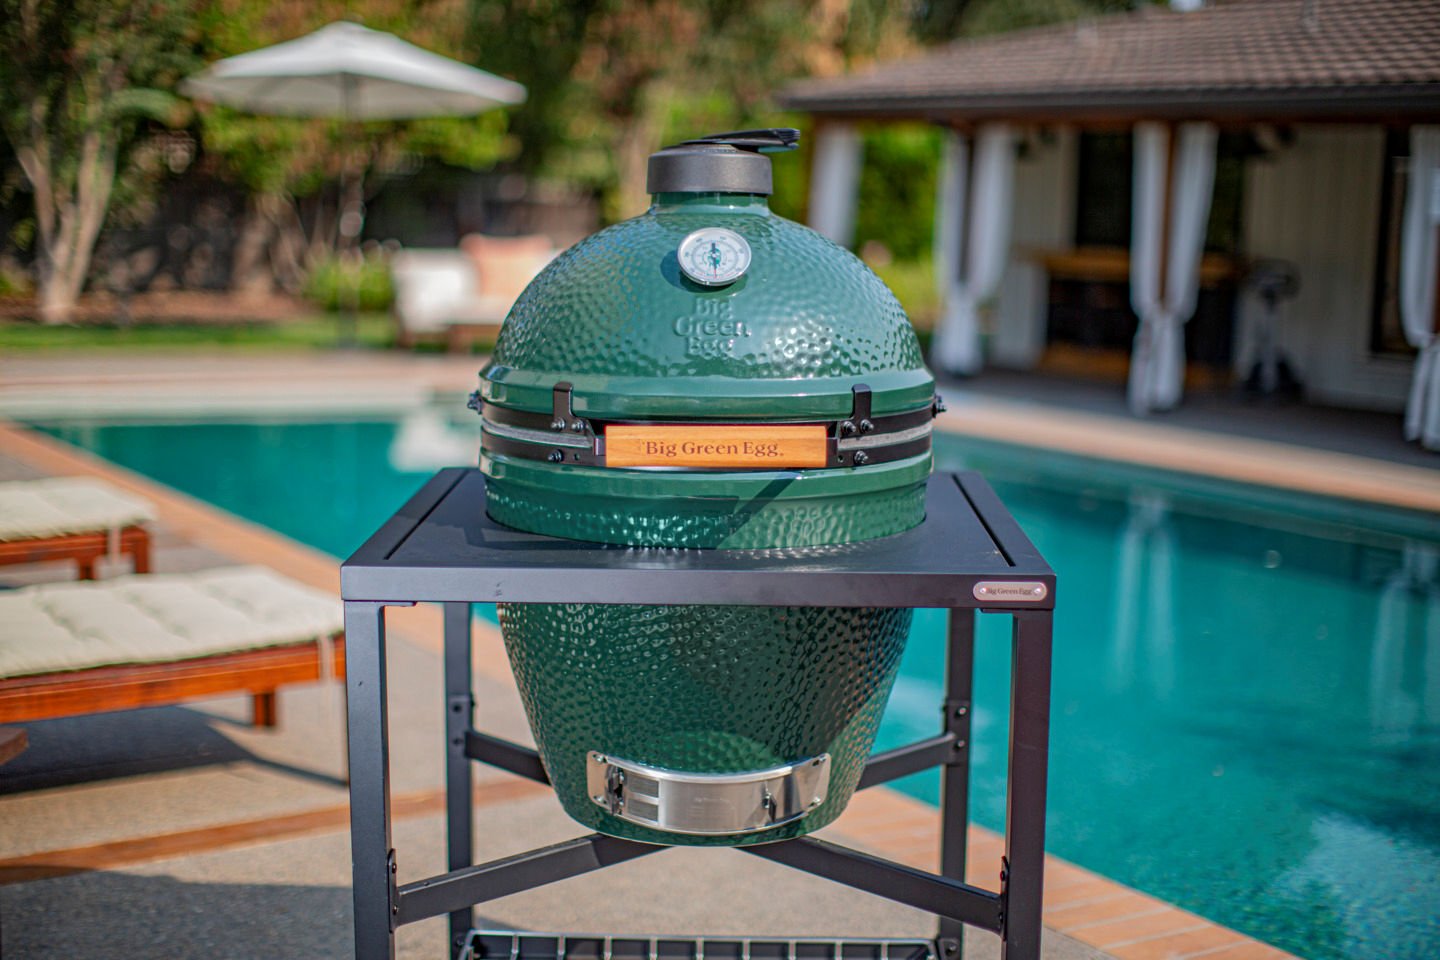 Whats So Special About the Big Green Egg